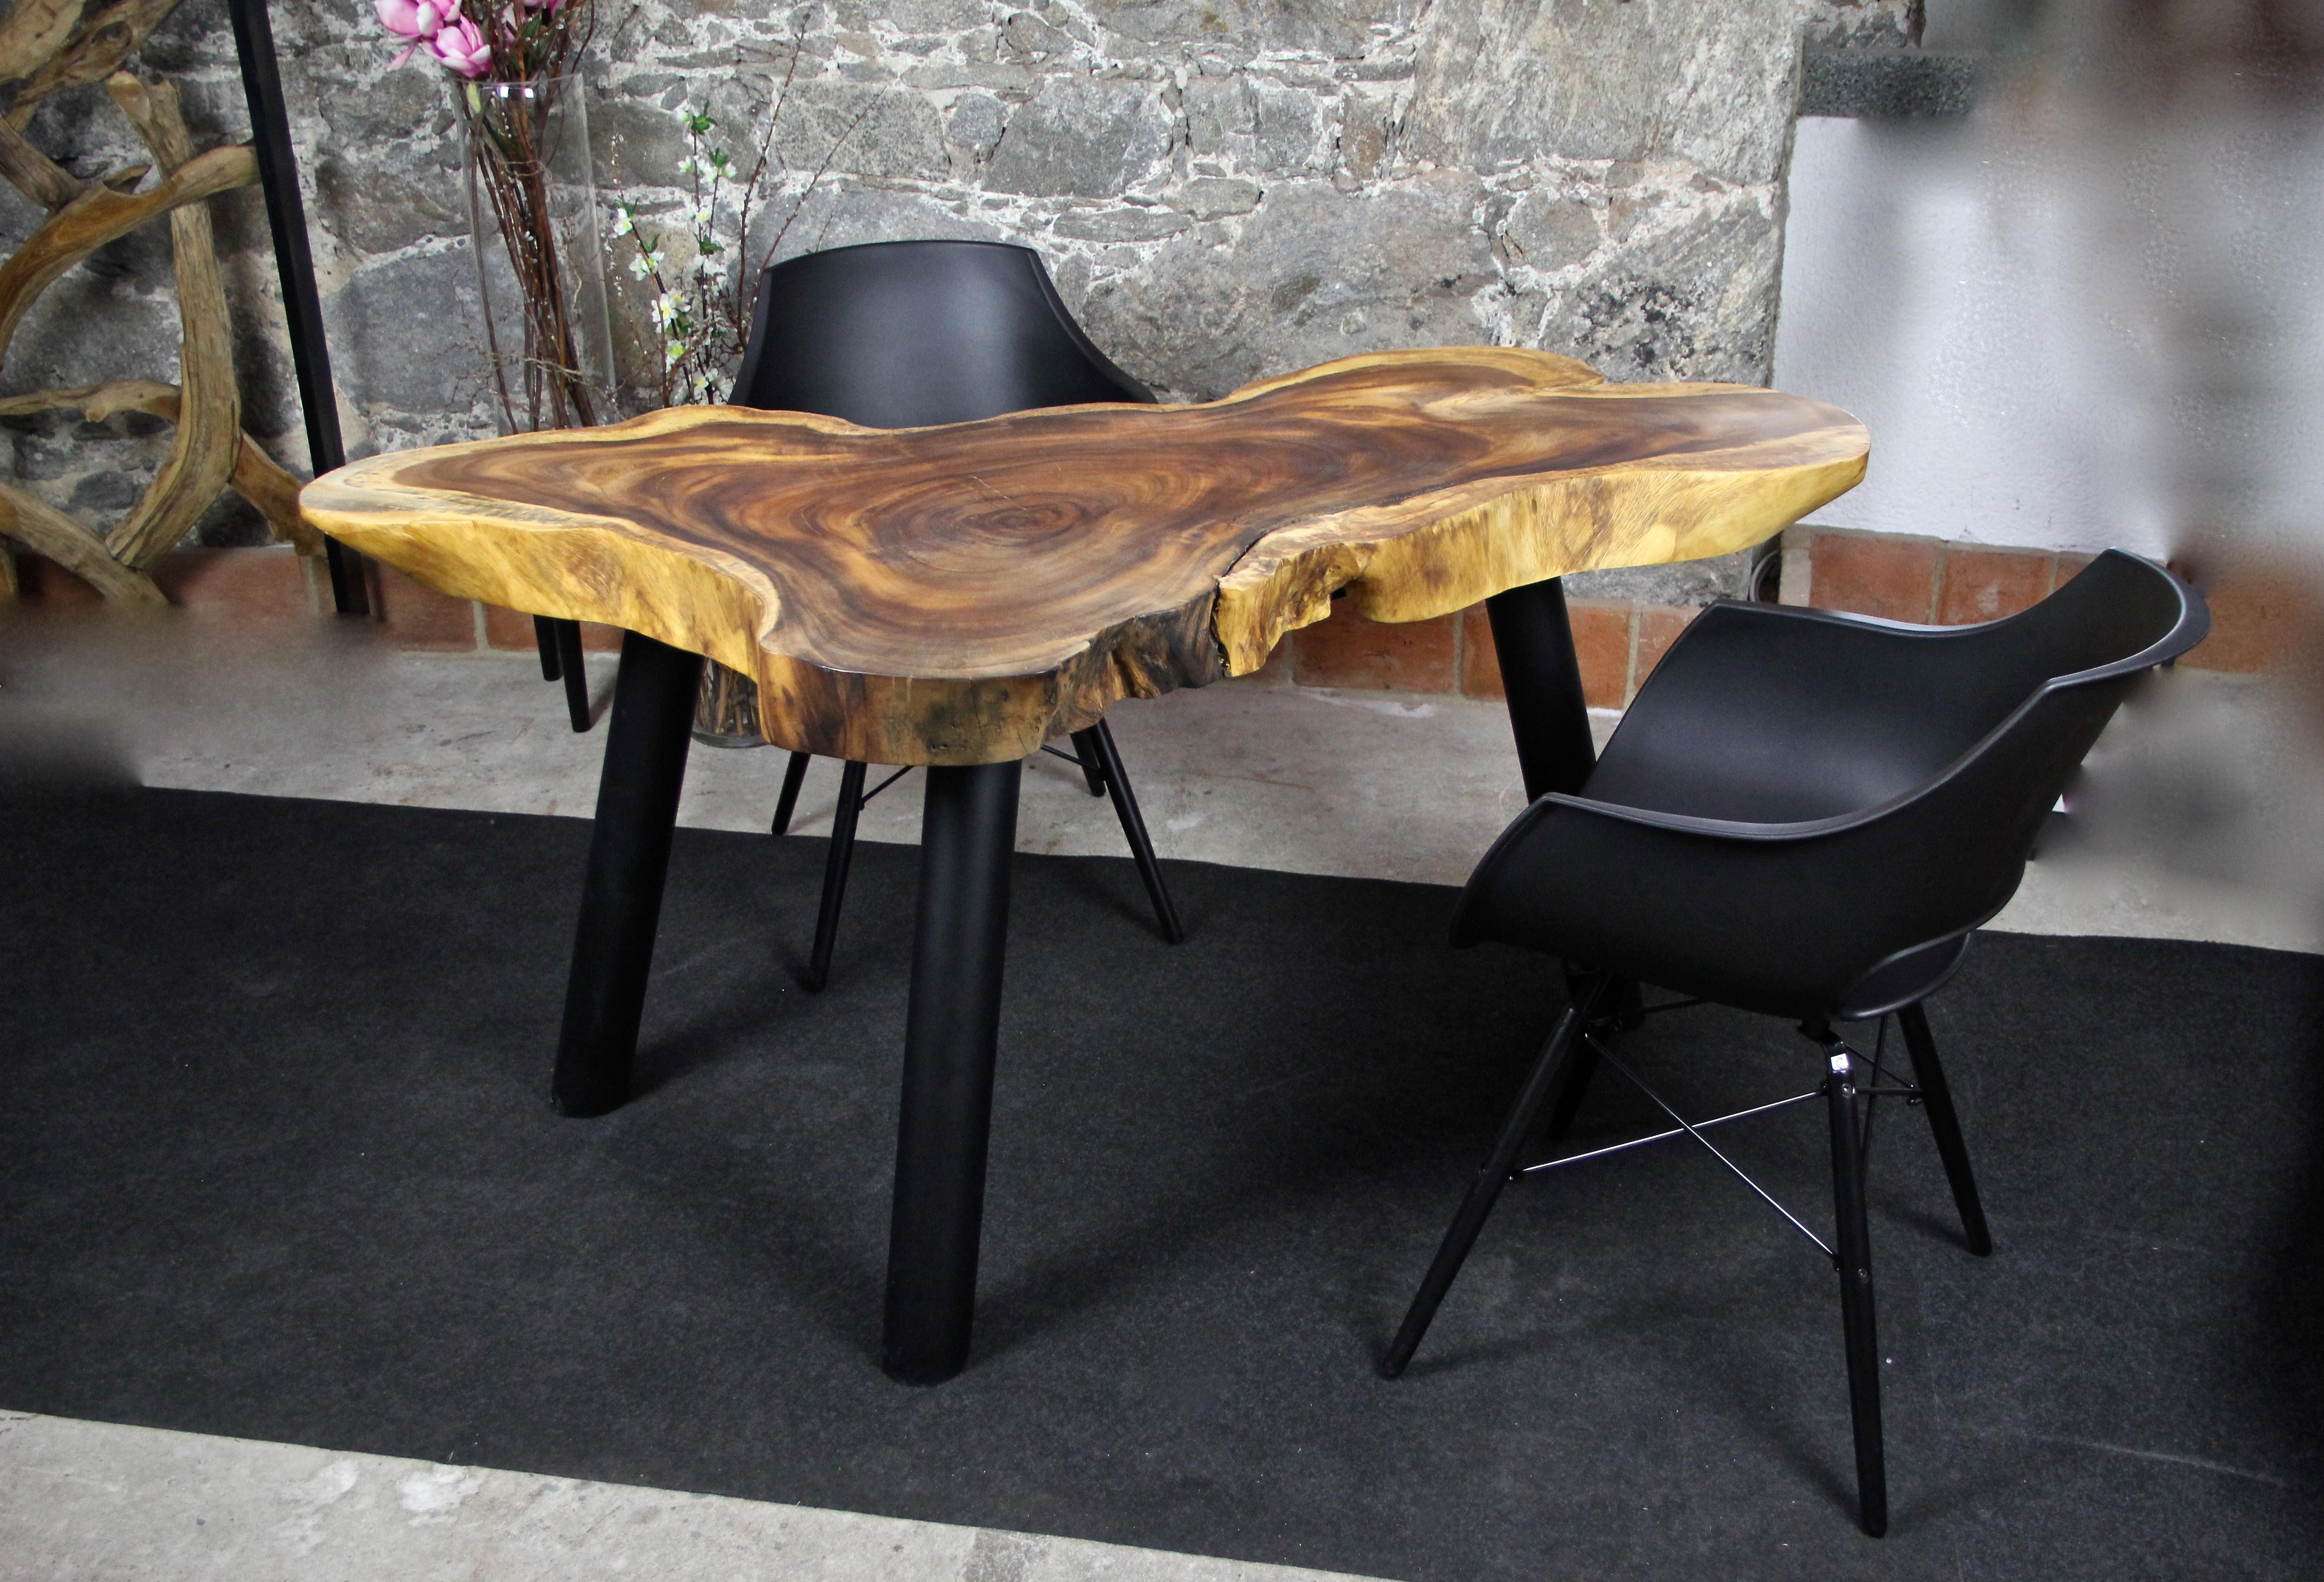 Unusual shaped organic modern Suar wood dining table. Standing on three massive round black metal feet, this extraordinary mid-sized dining table or coffee table (for four persons) stands out with its unique shape, grain and coloration. The